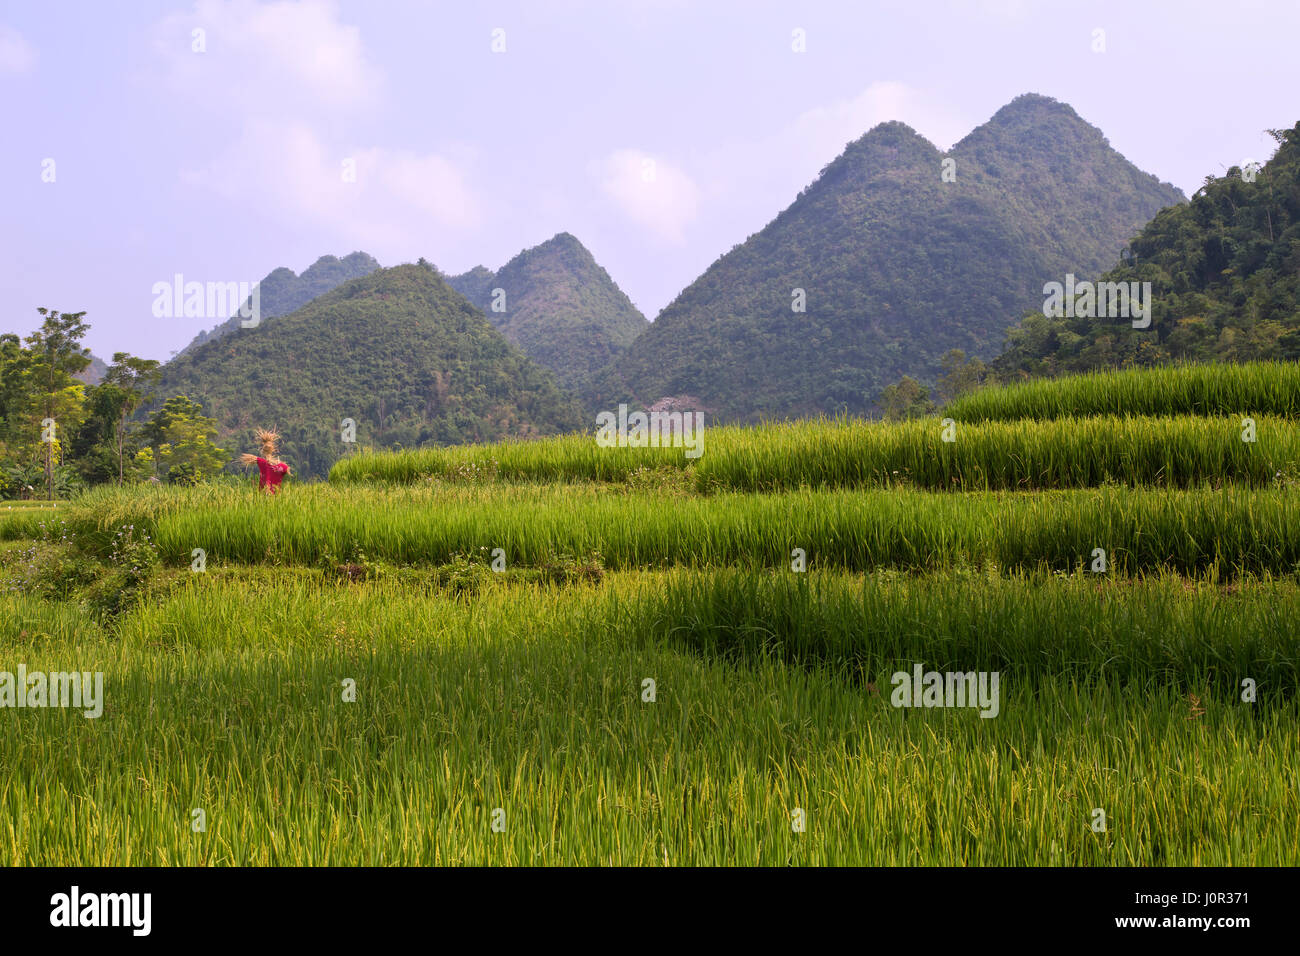 Maturing terraced rice fields, scarecrow overlooking,  Muong Thanh, Dien Bien Province, Vietnam, Indochina. Stock Photo